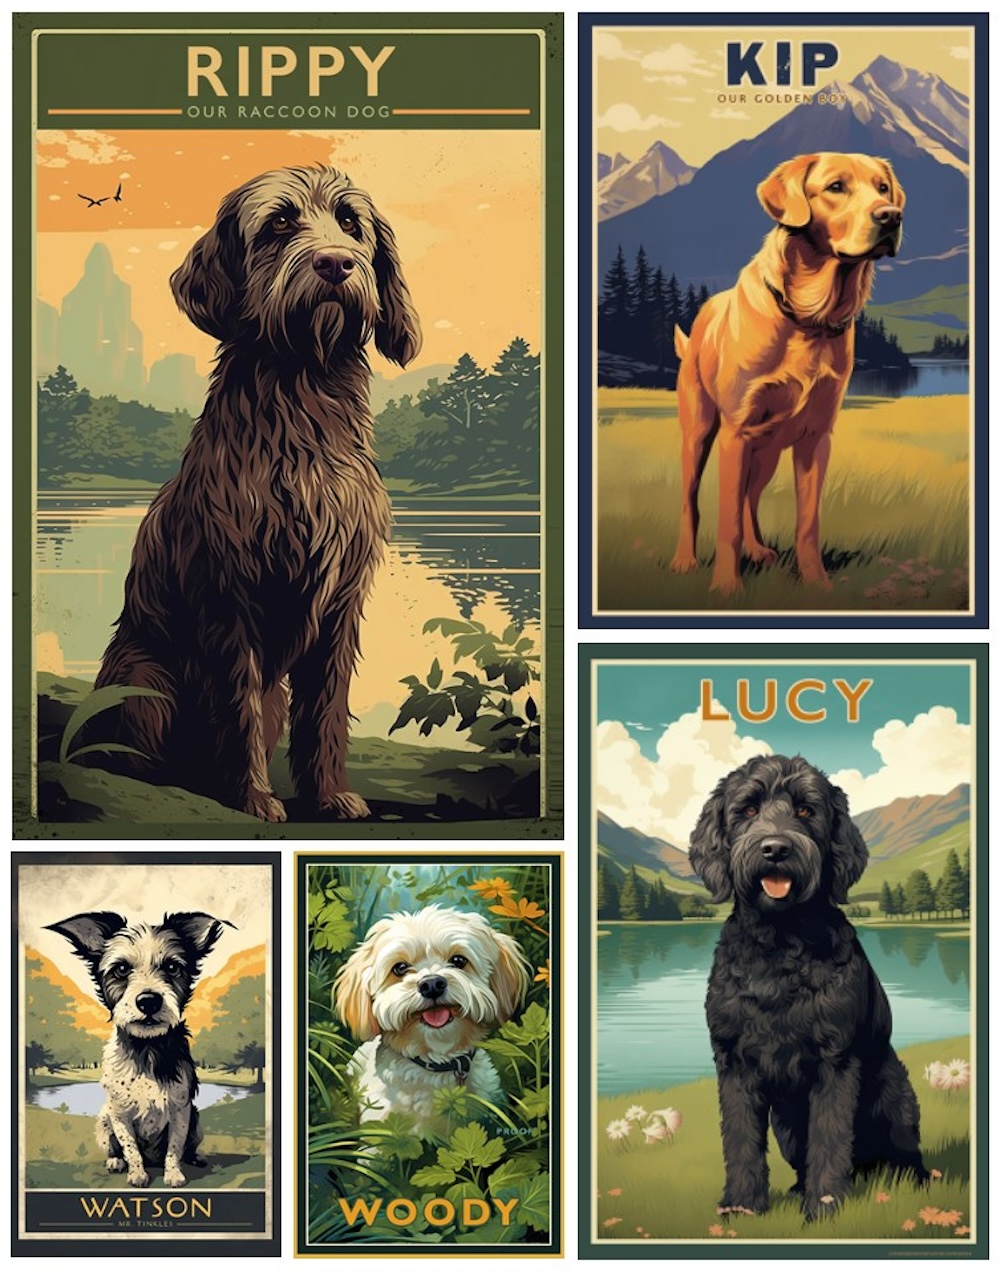 retro-style dog posters by photographer Jim Henderson